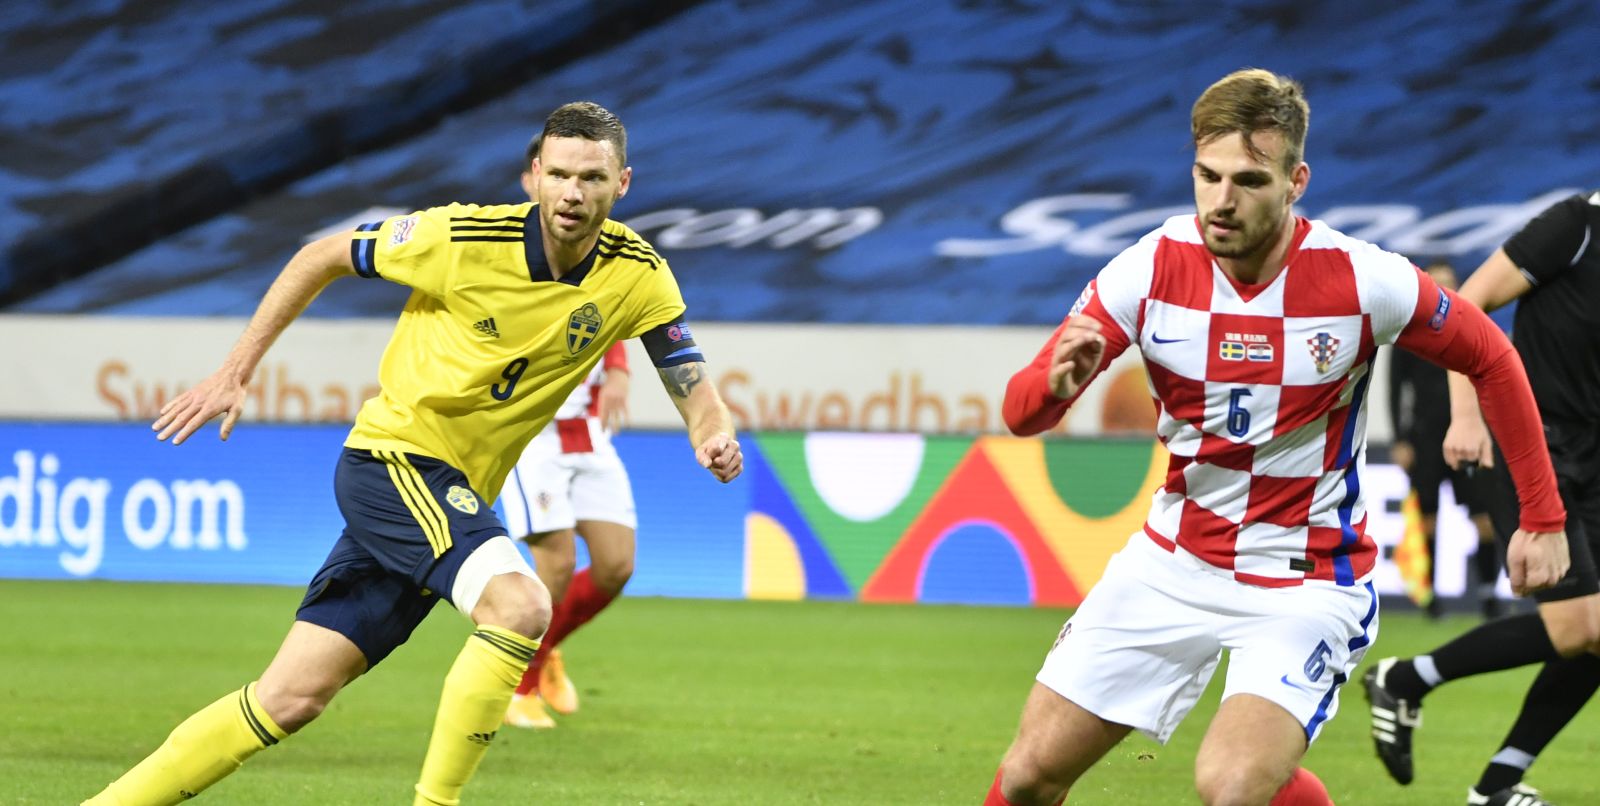 epa08820713 Swedens Marcus Berg (L) chasing Croatia's Marin Pongracic (R) during UEFA Nations League group A3 match between Sweden and Croatia at Friends Arena in Stockholm, Sweden, 14 November 2020.  EPA/Henrik Montgomery SWEDEN OUT